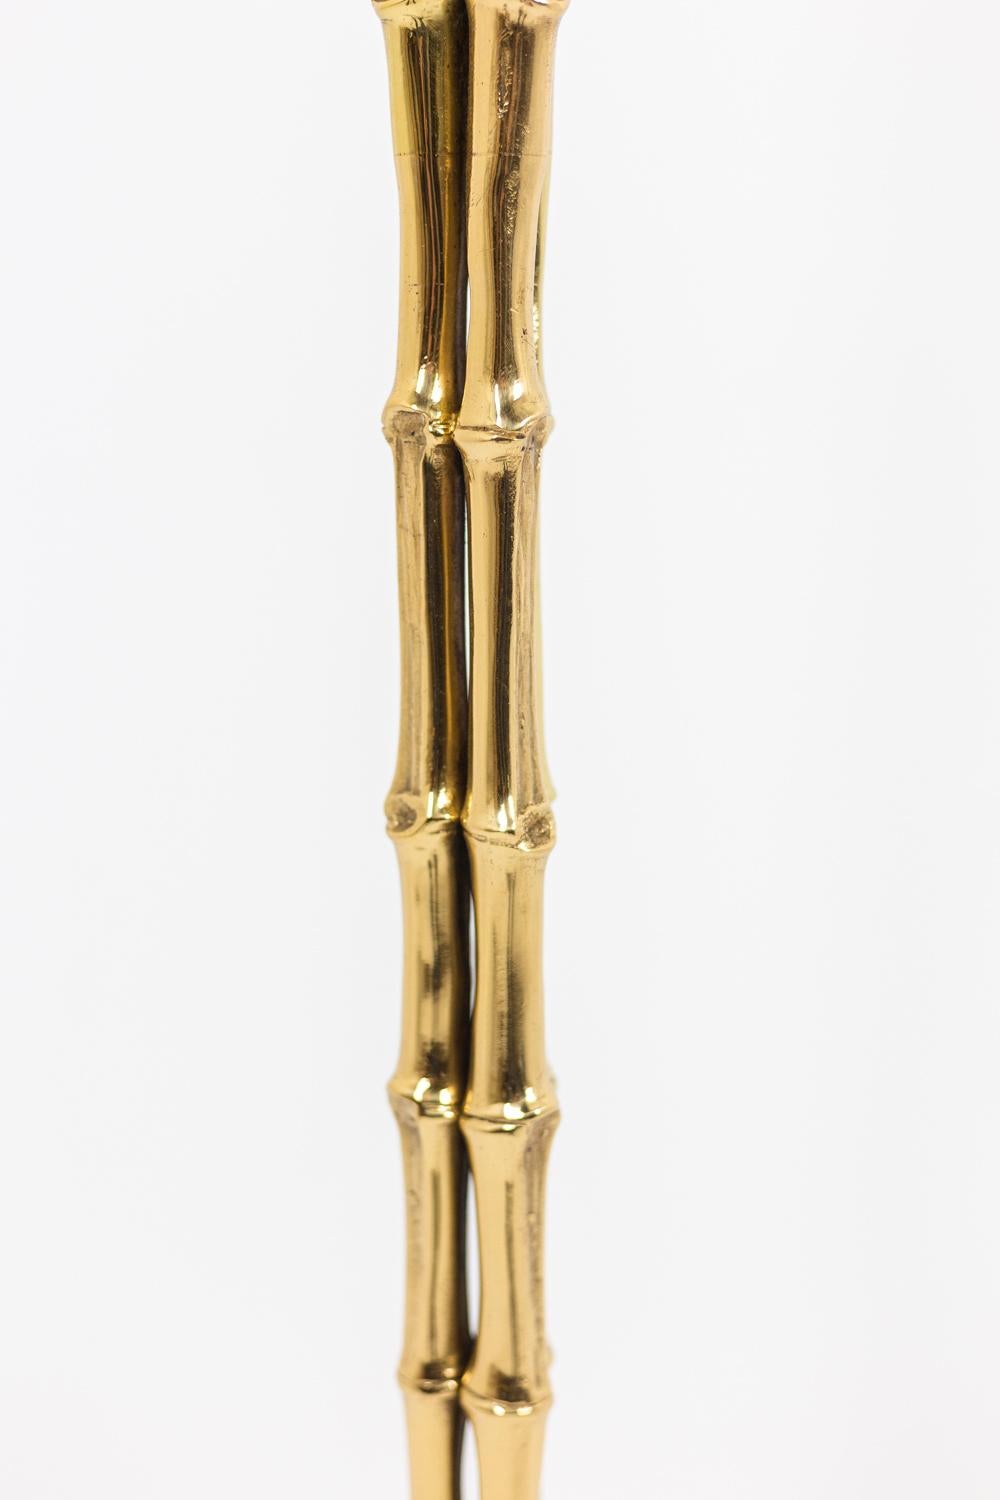 Late 20th Century Maison Baguès, Tripod Floor Lamp Imitating Bamboo in Gilt Bronze, 1970s For Sale